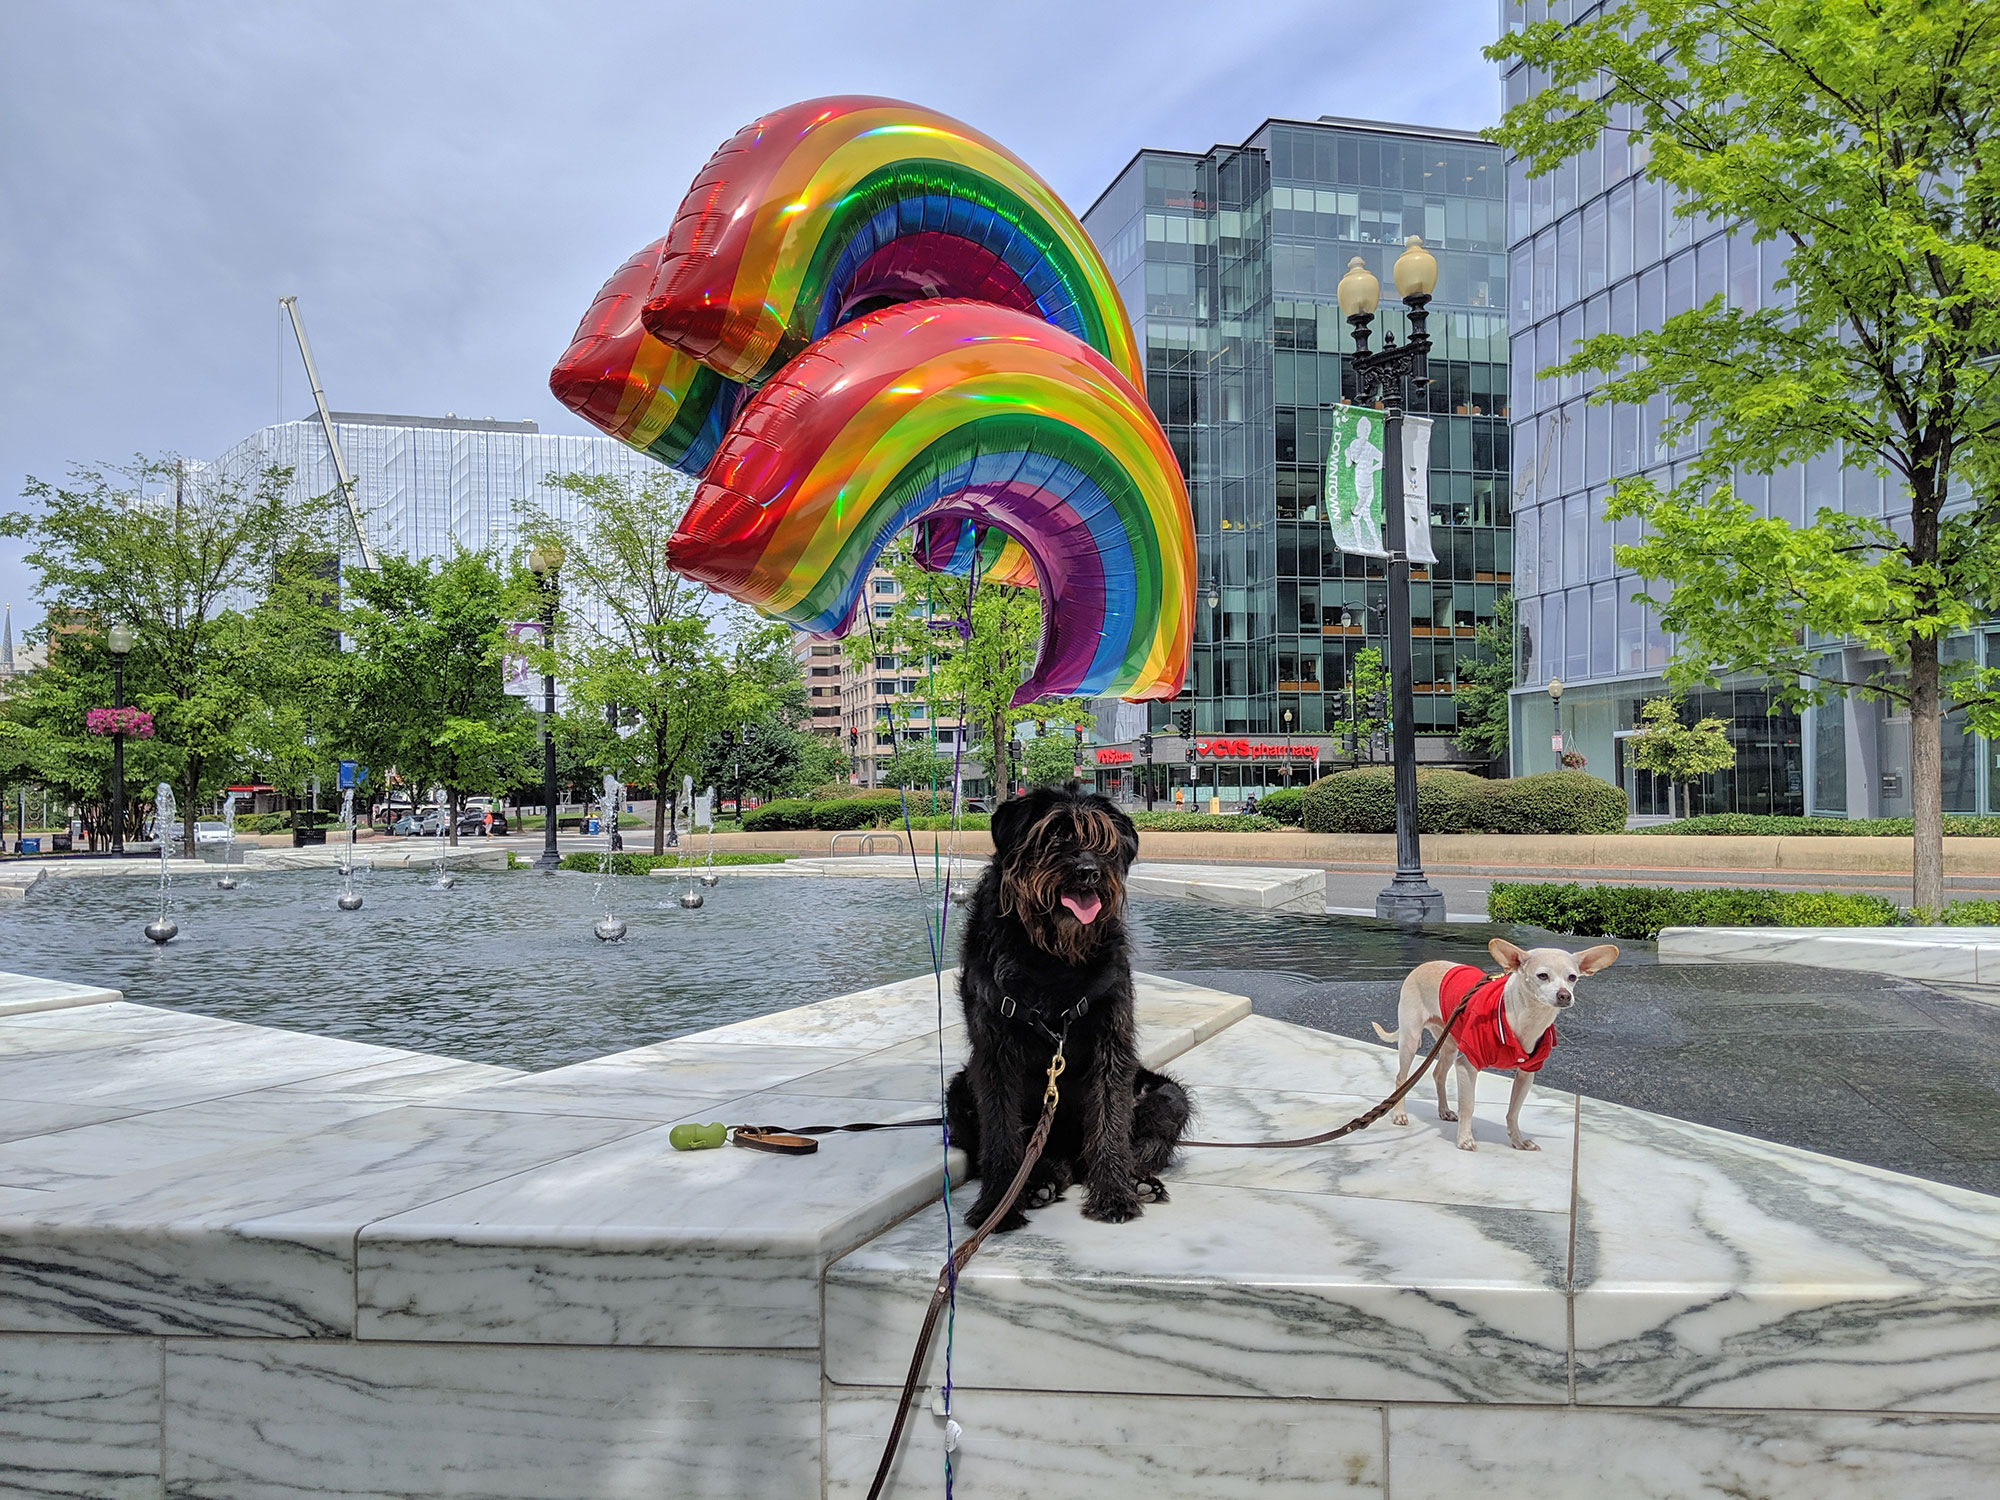 Ingrid and Gunter at a plaza near CityCenter DC with rainbow balloons.